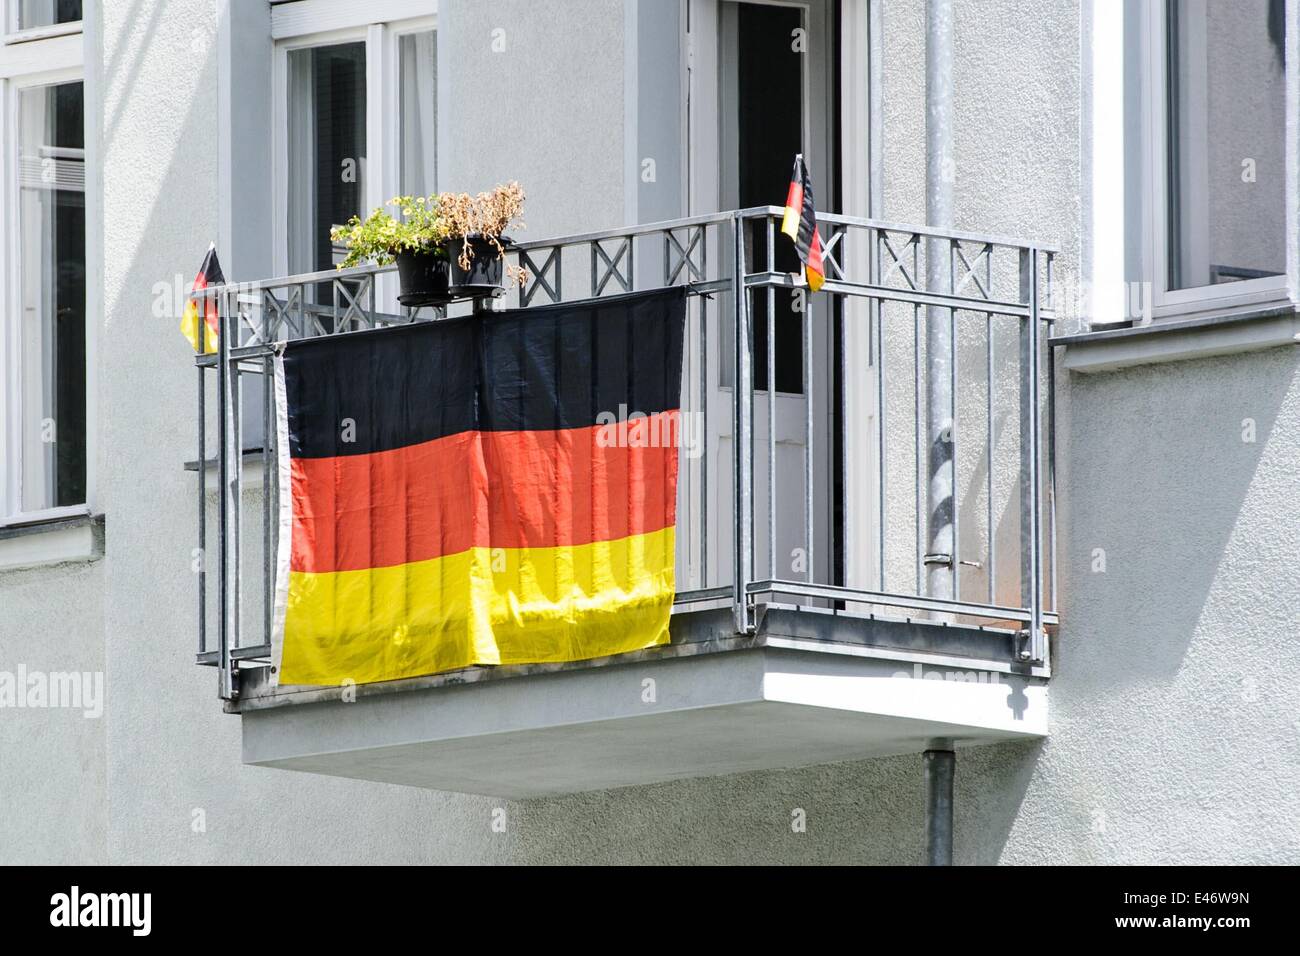 Berlin, Germany. 2nd July, 2014. A Germany-flag hangs on a facade of a building, on July 2, 2014 in Berlin, Germany. Photo: picture alliance/Robert Schlesinger/dpa/Alamy Live News Stock Photo